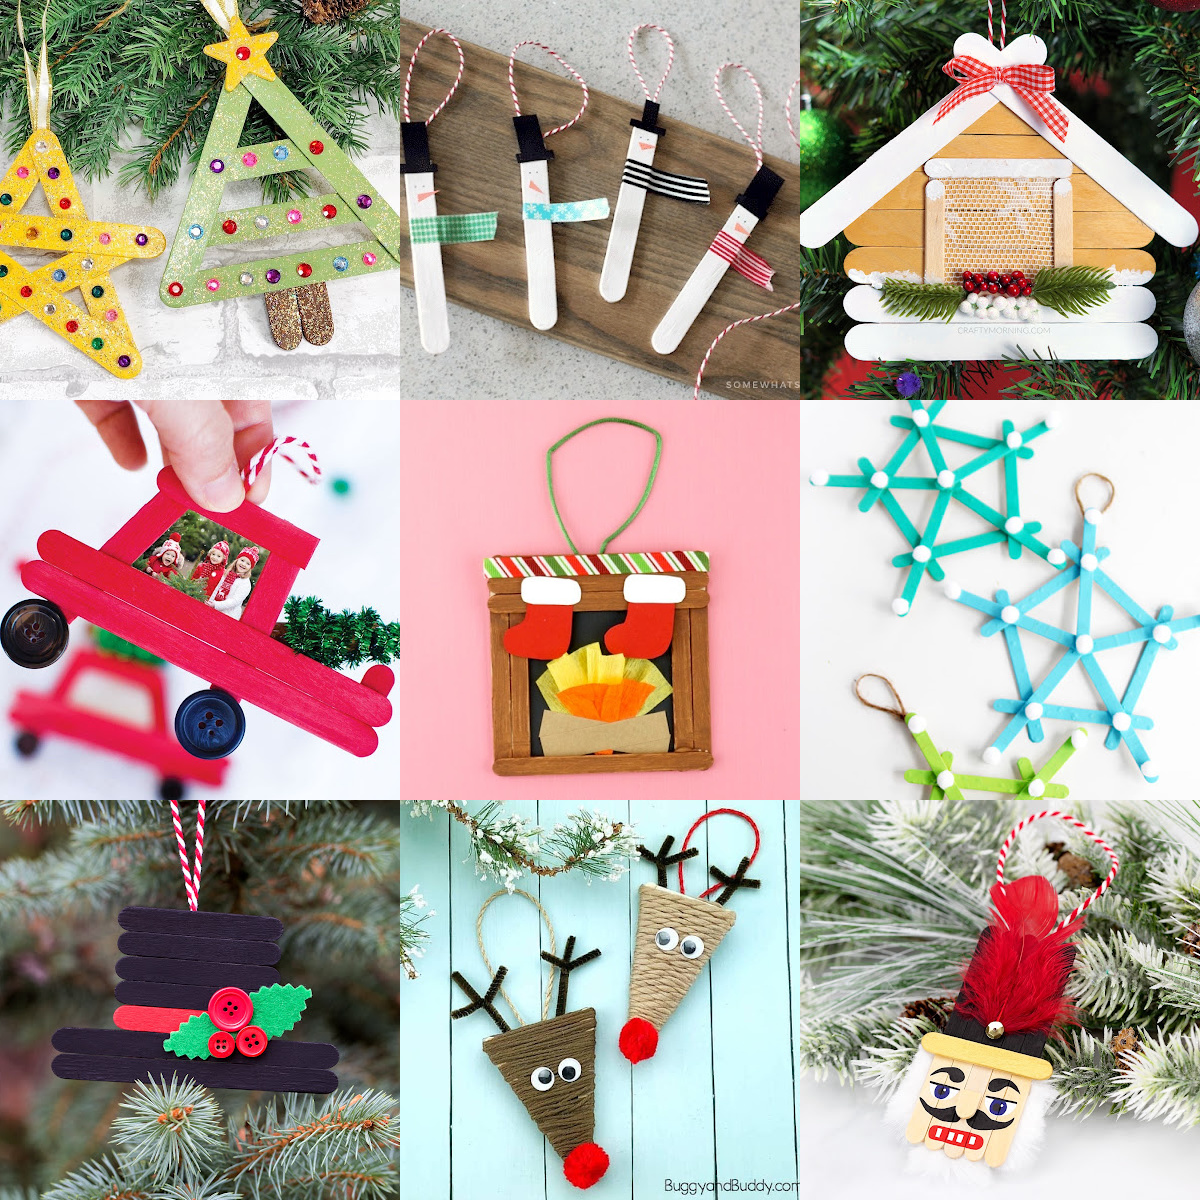 Easy Christmas Crafts with Popsicle Sticks for Kids - DIY Candy